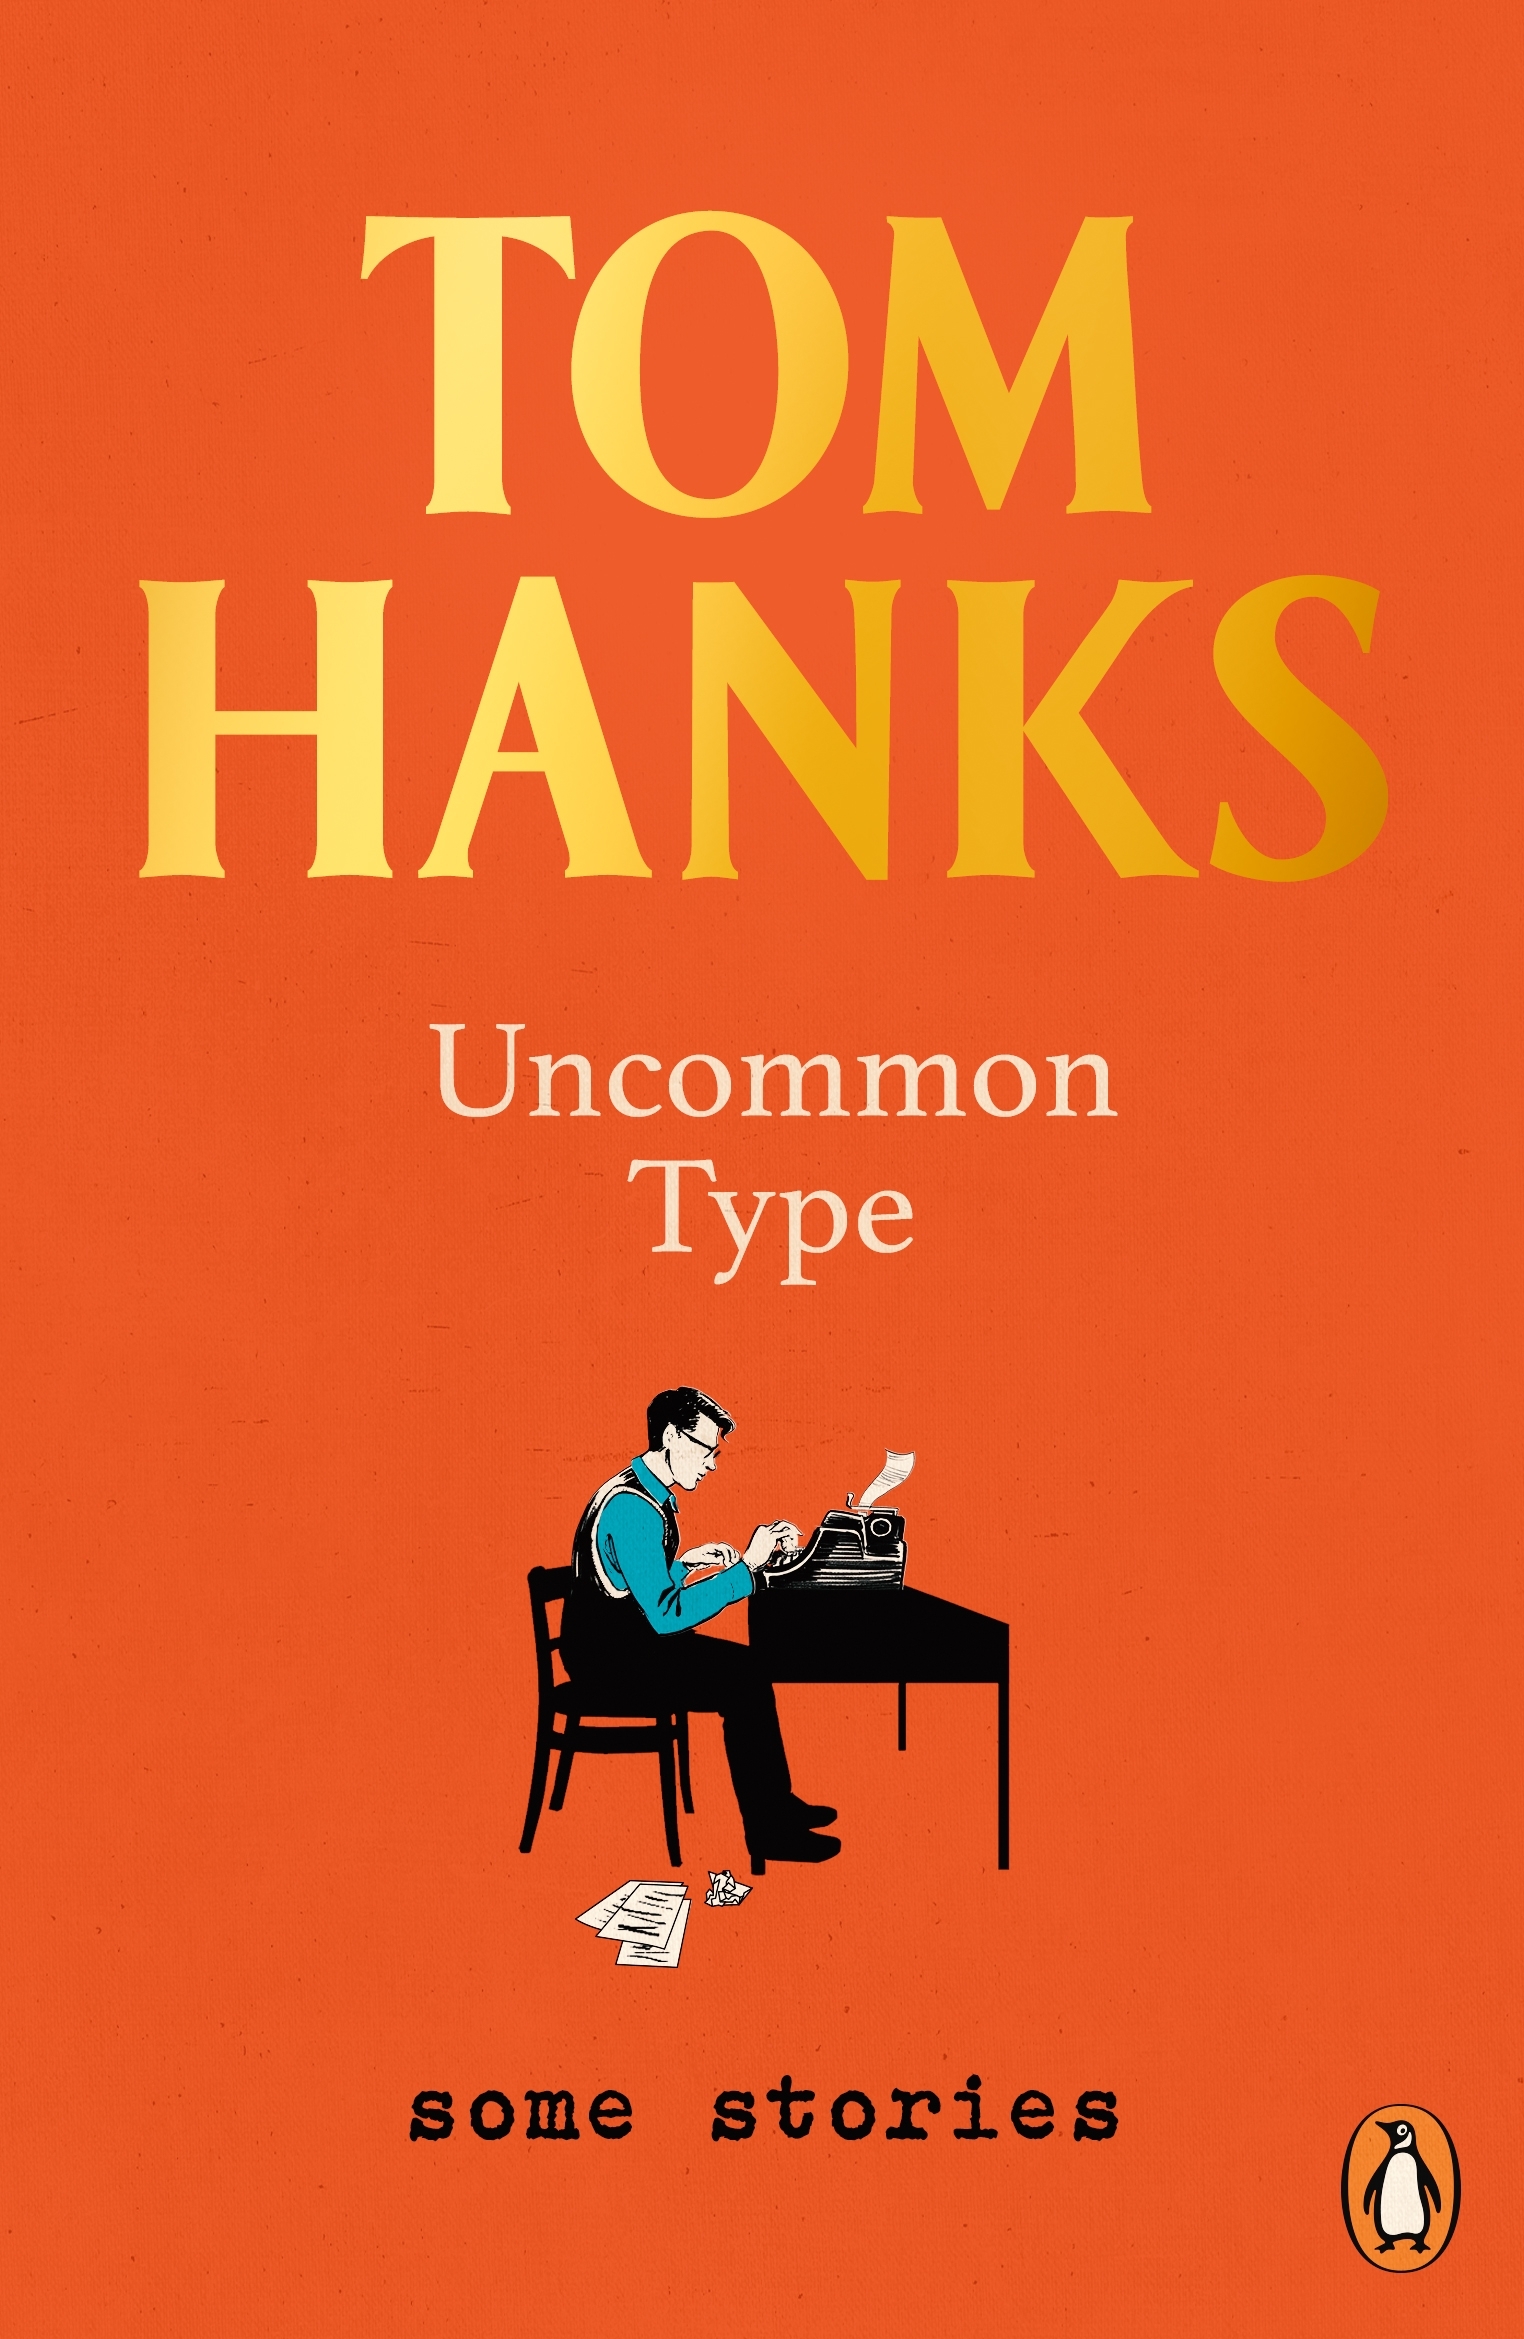 Extract Uncommon Type by Tom Hanks image picture pic